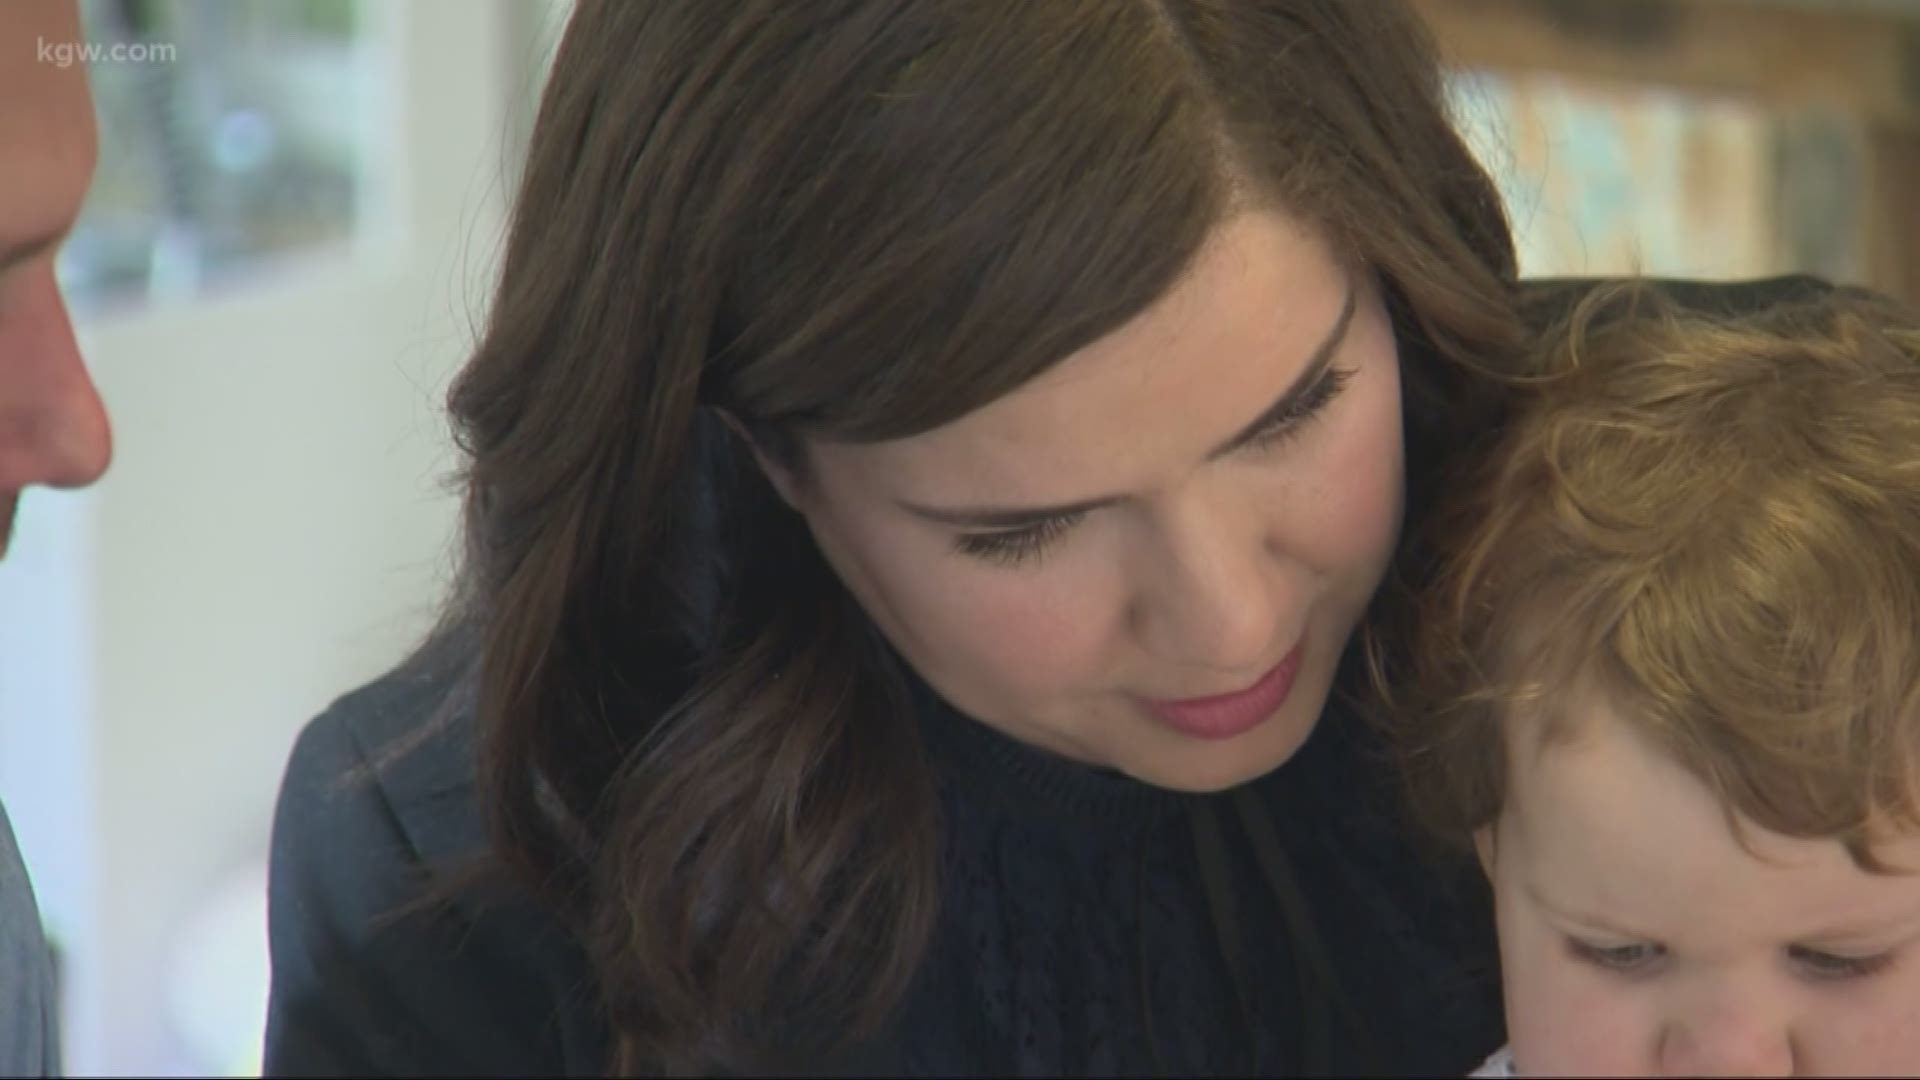 With Mother's Day approaching, KGW Sunrise anchor Ashley Korslien is featuring mom's who juggle a career and parenting. Monday's feature is about Victoria Venturi, CEO of Paper Epiphanies